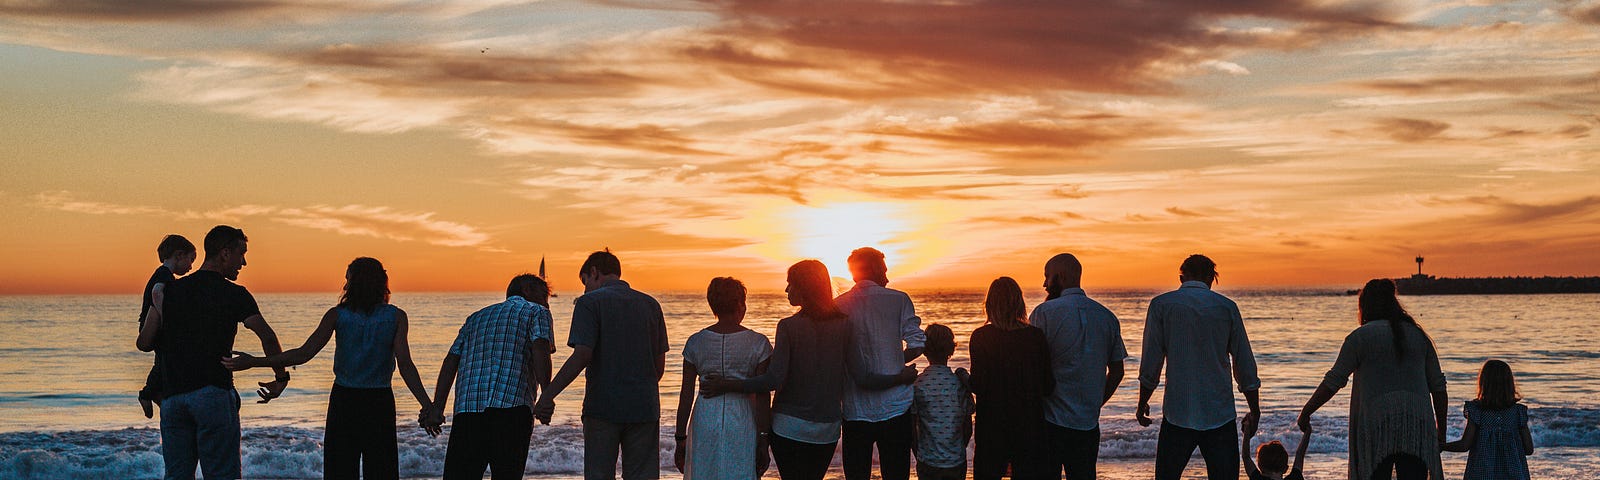 A large group of adults, children and babies holding hands and standing in a line on the beach, looking out to the horizon as the sun sets